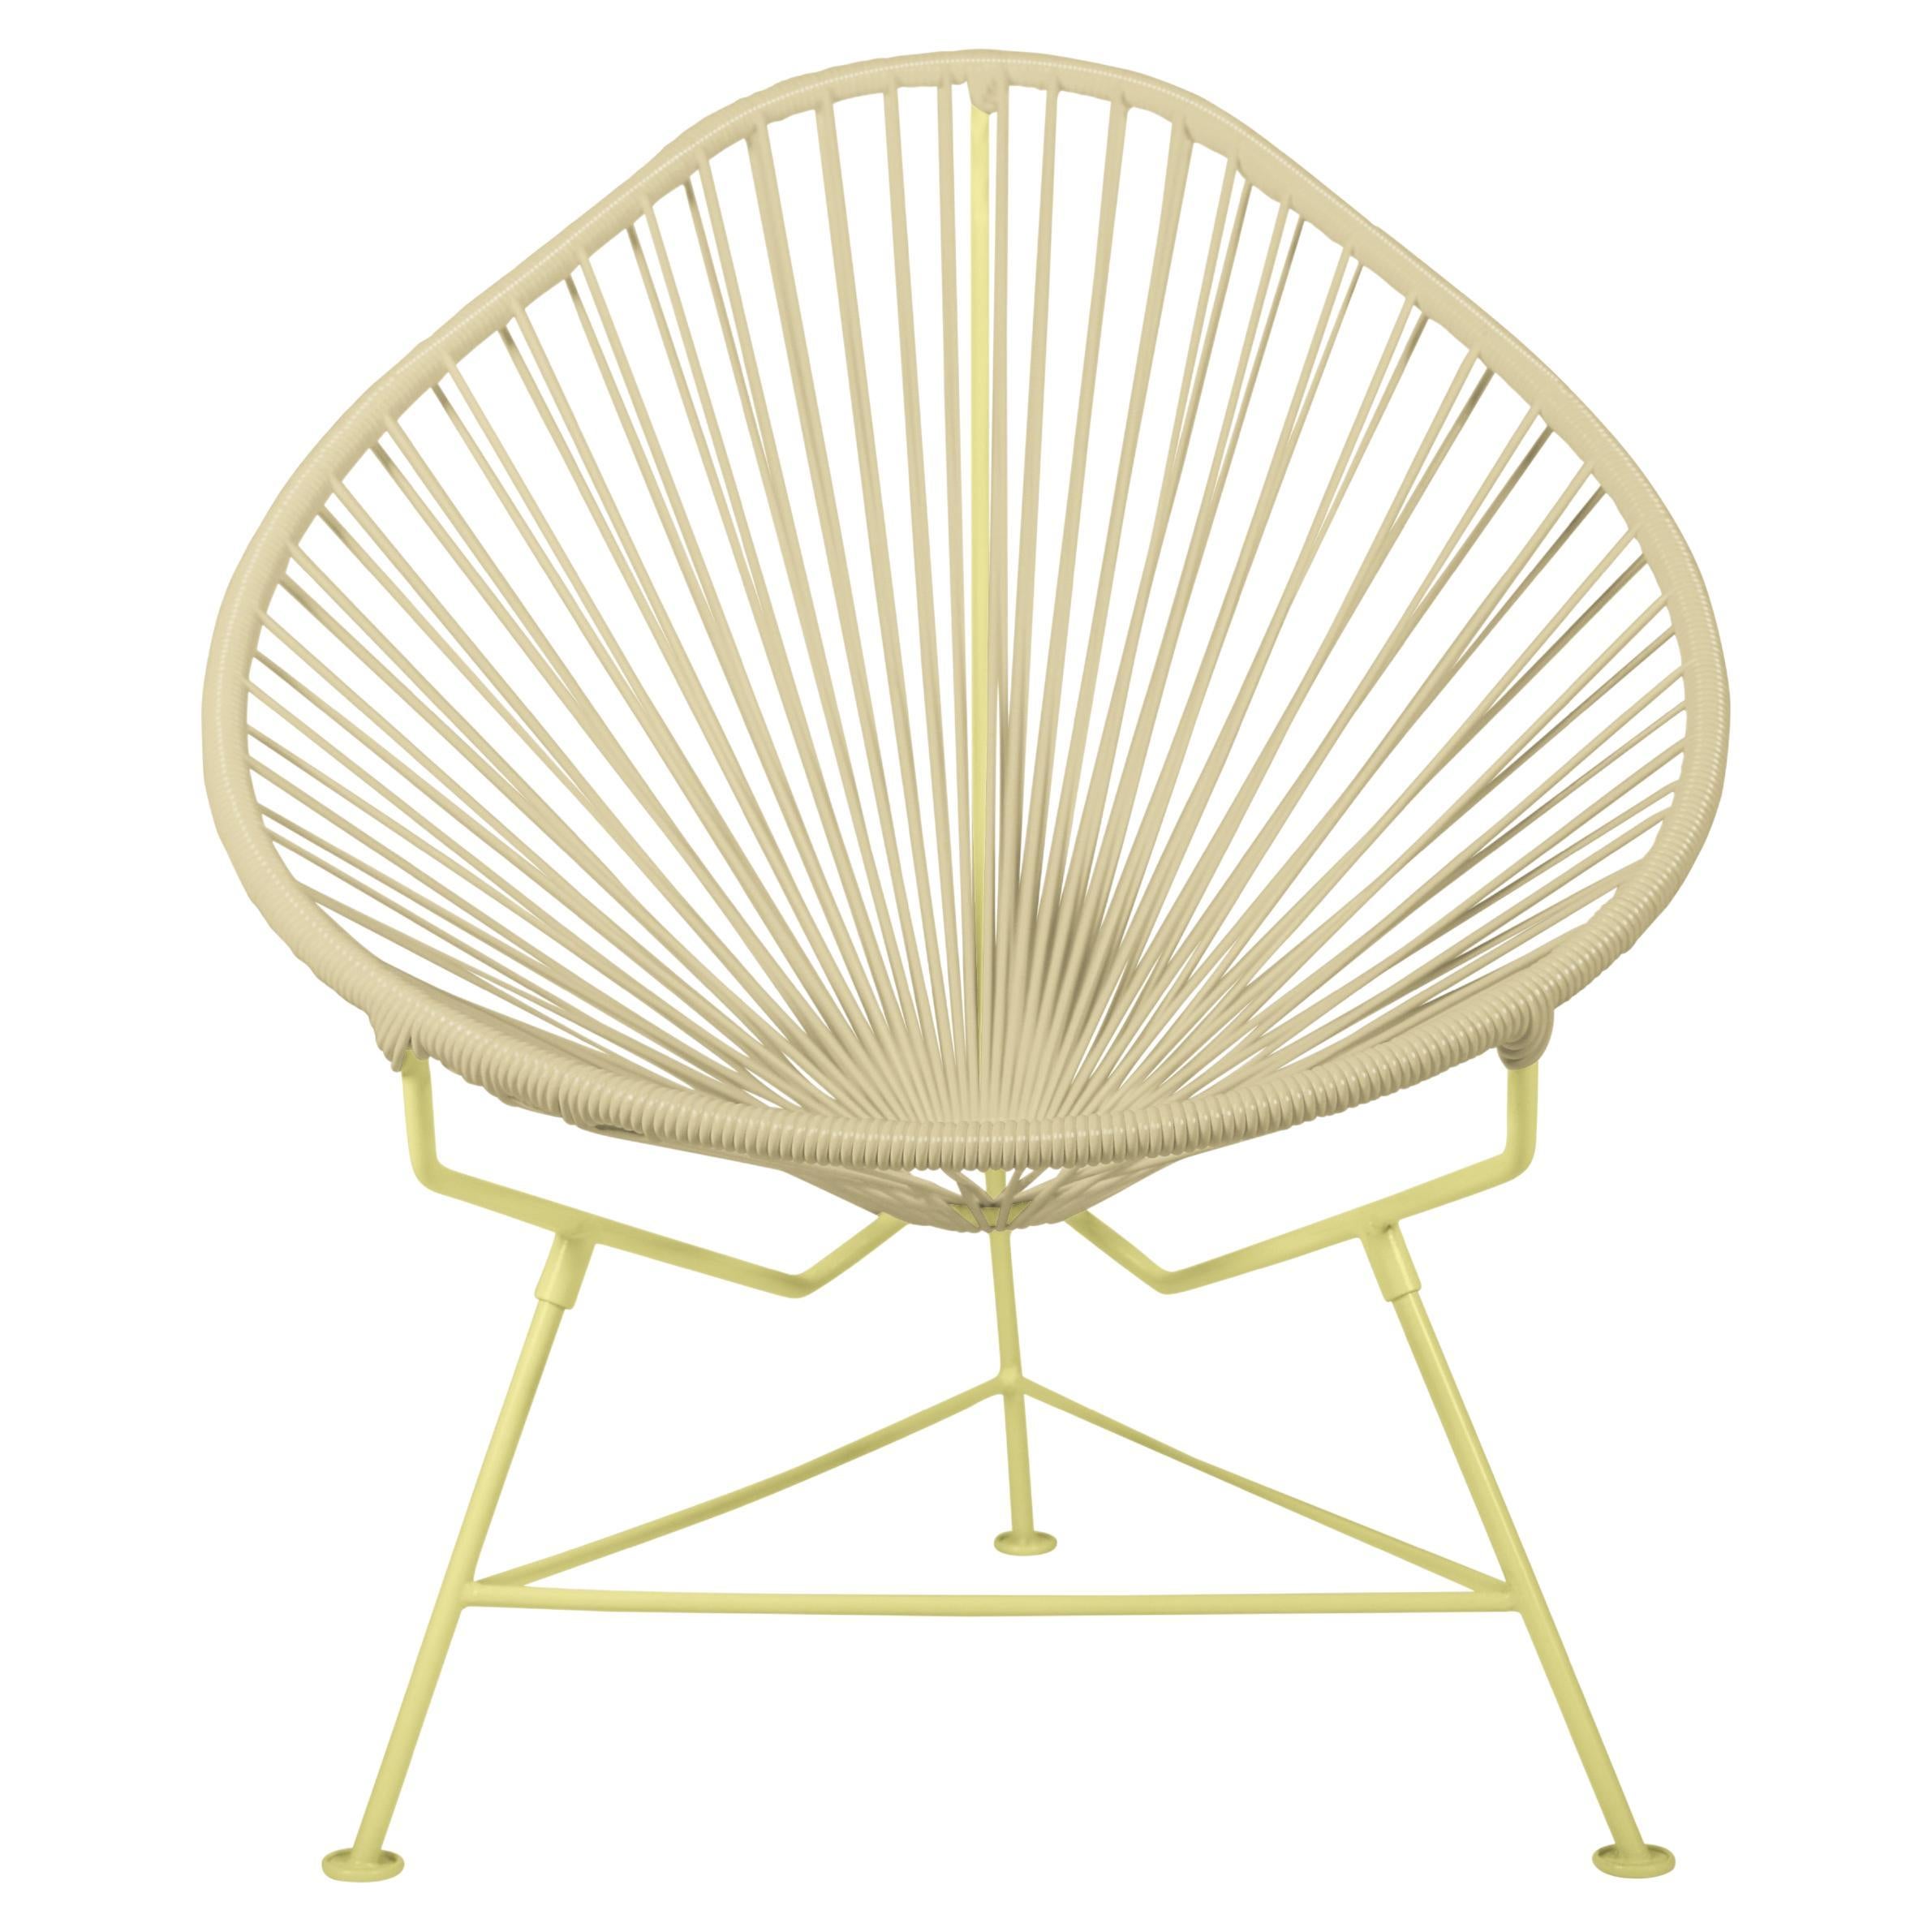 Innit Designs Acapulco Chair Ivory Weave on Yellow Frame For Sale